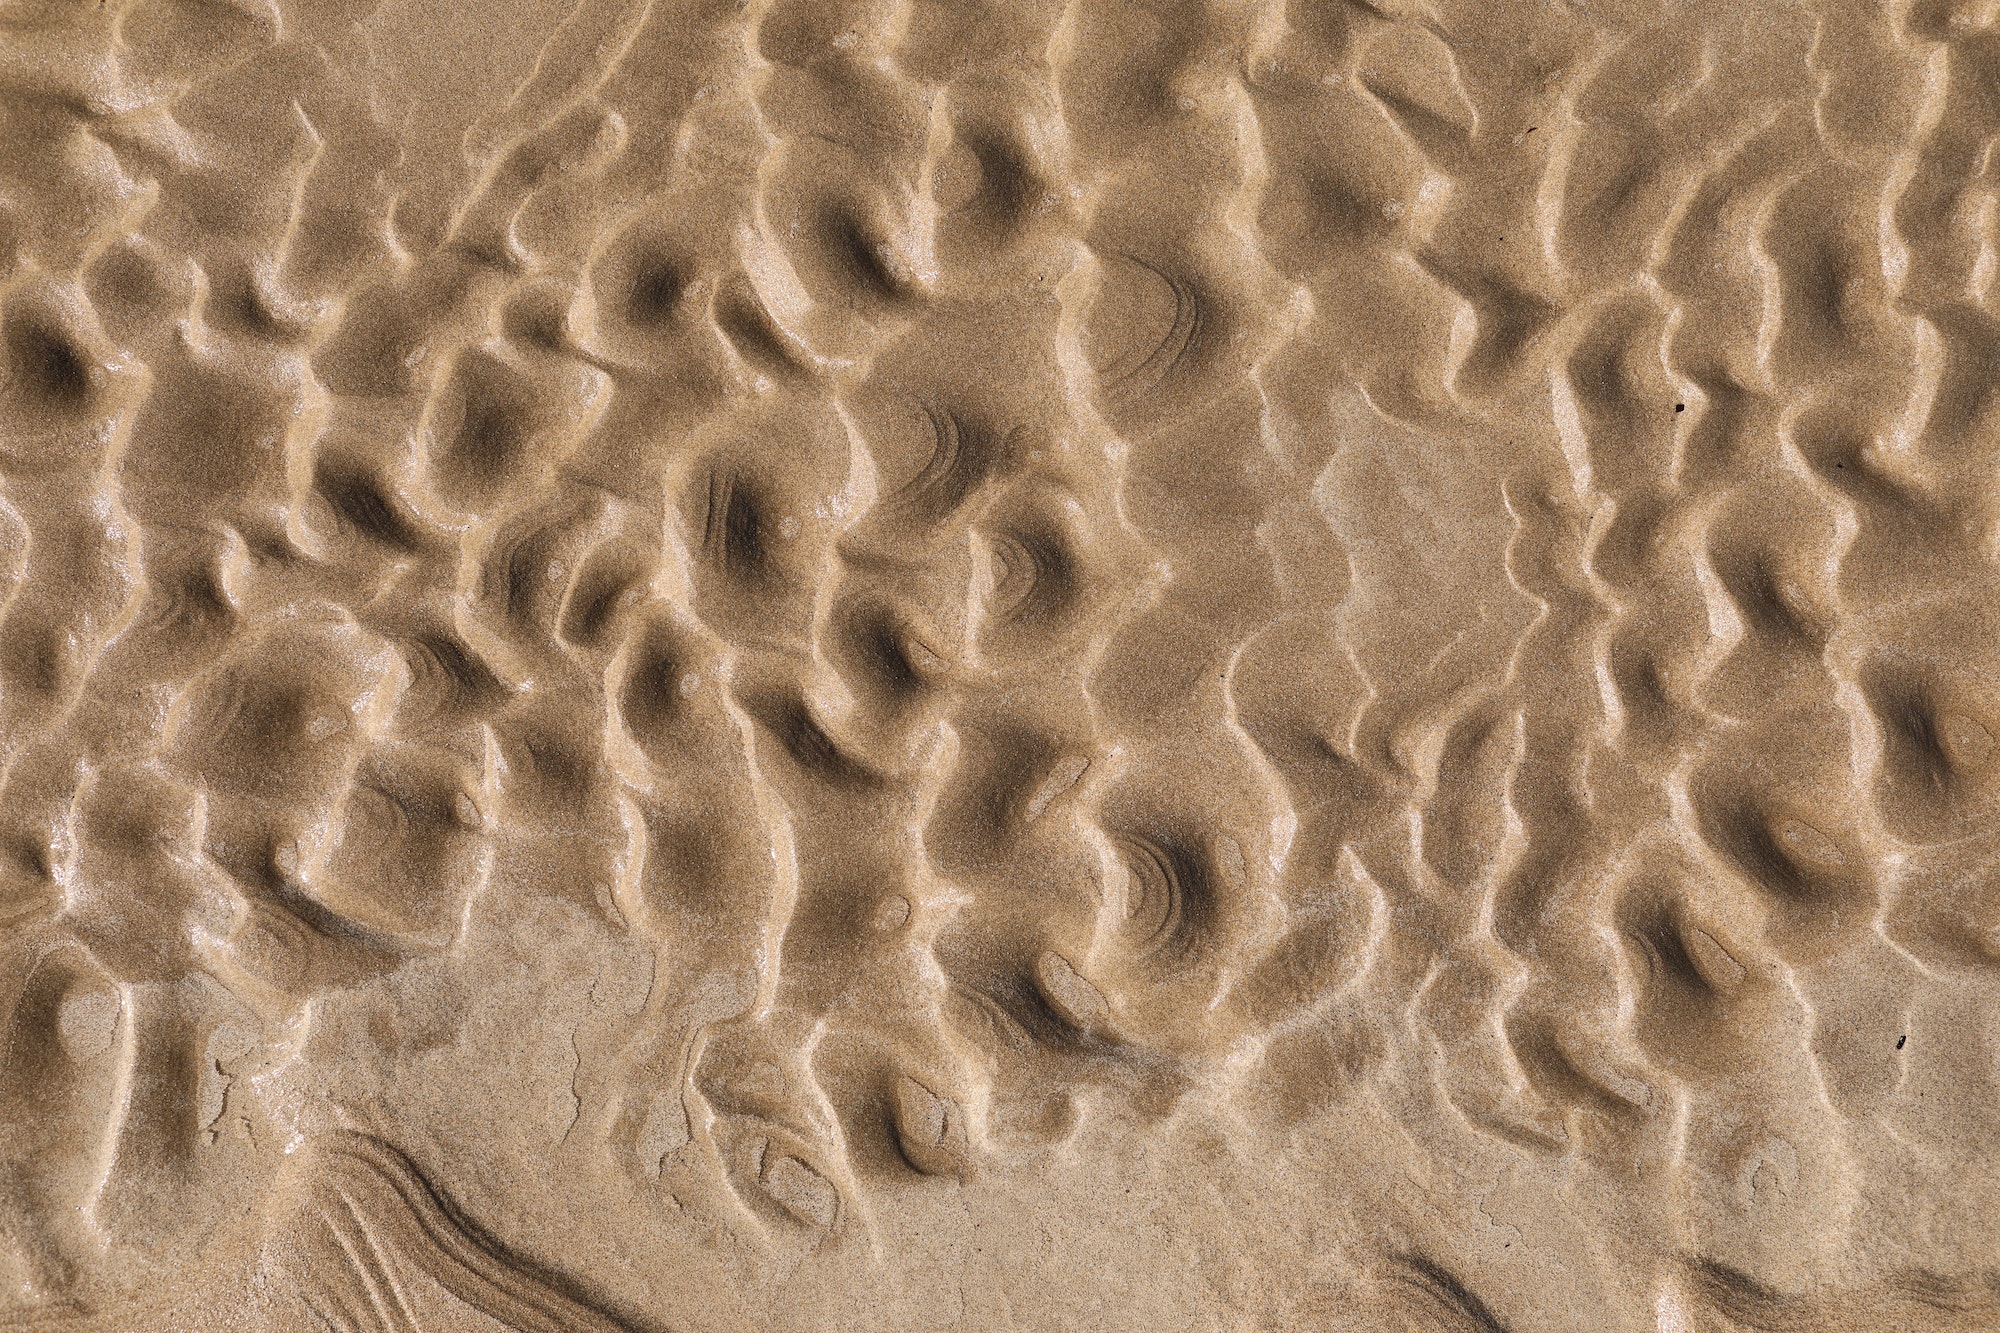 Natural sand patterns on the beach at low tide.copy space.